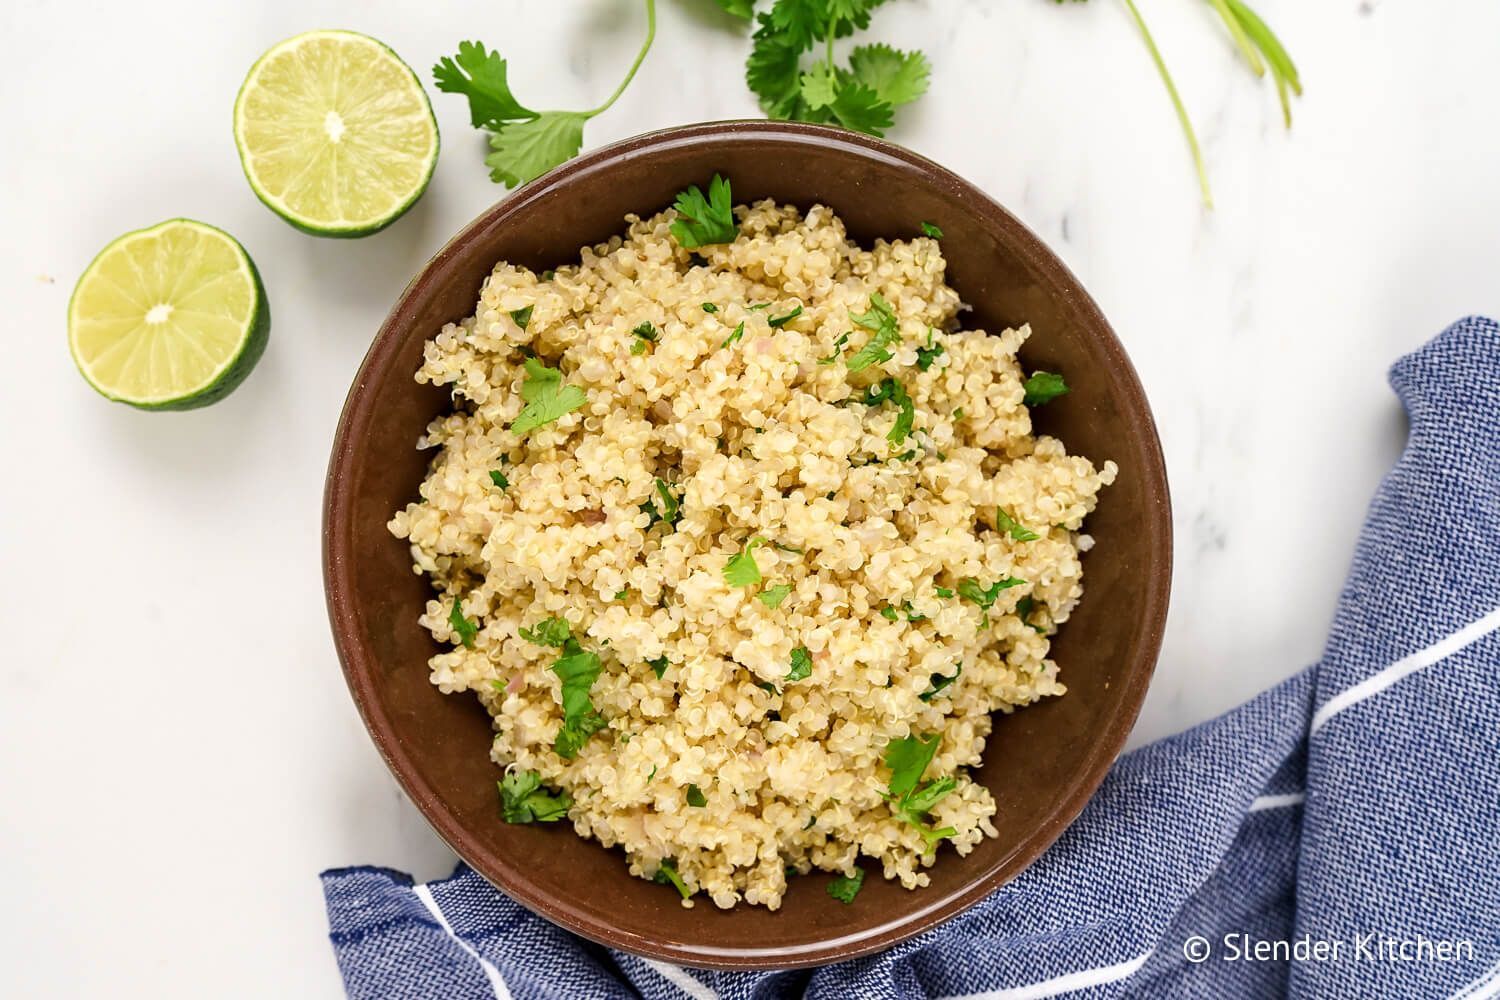 Cilantro lime quinoa in a bowl with cilantro leaves, lime zest, garlic, and onion.